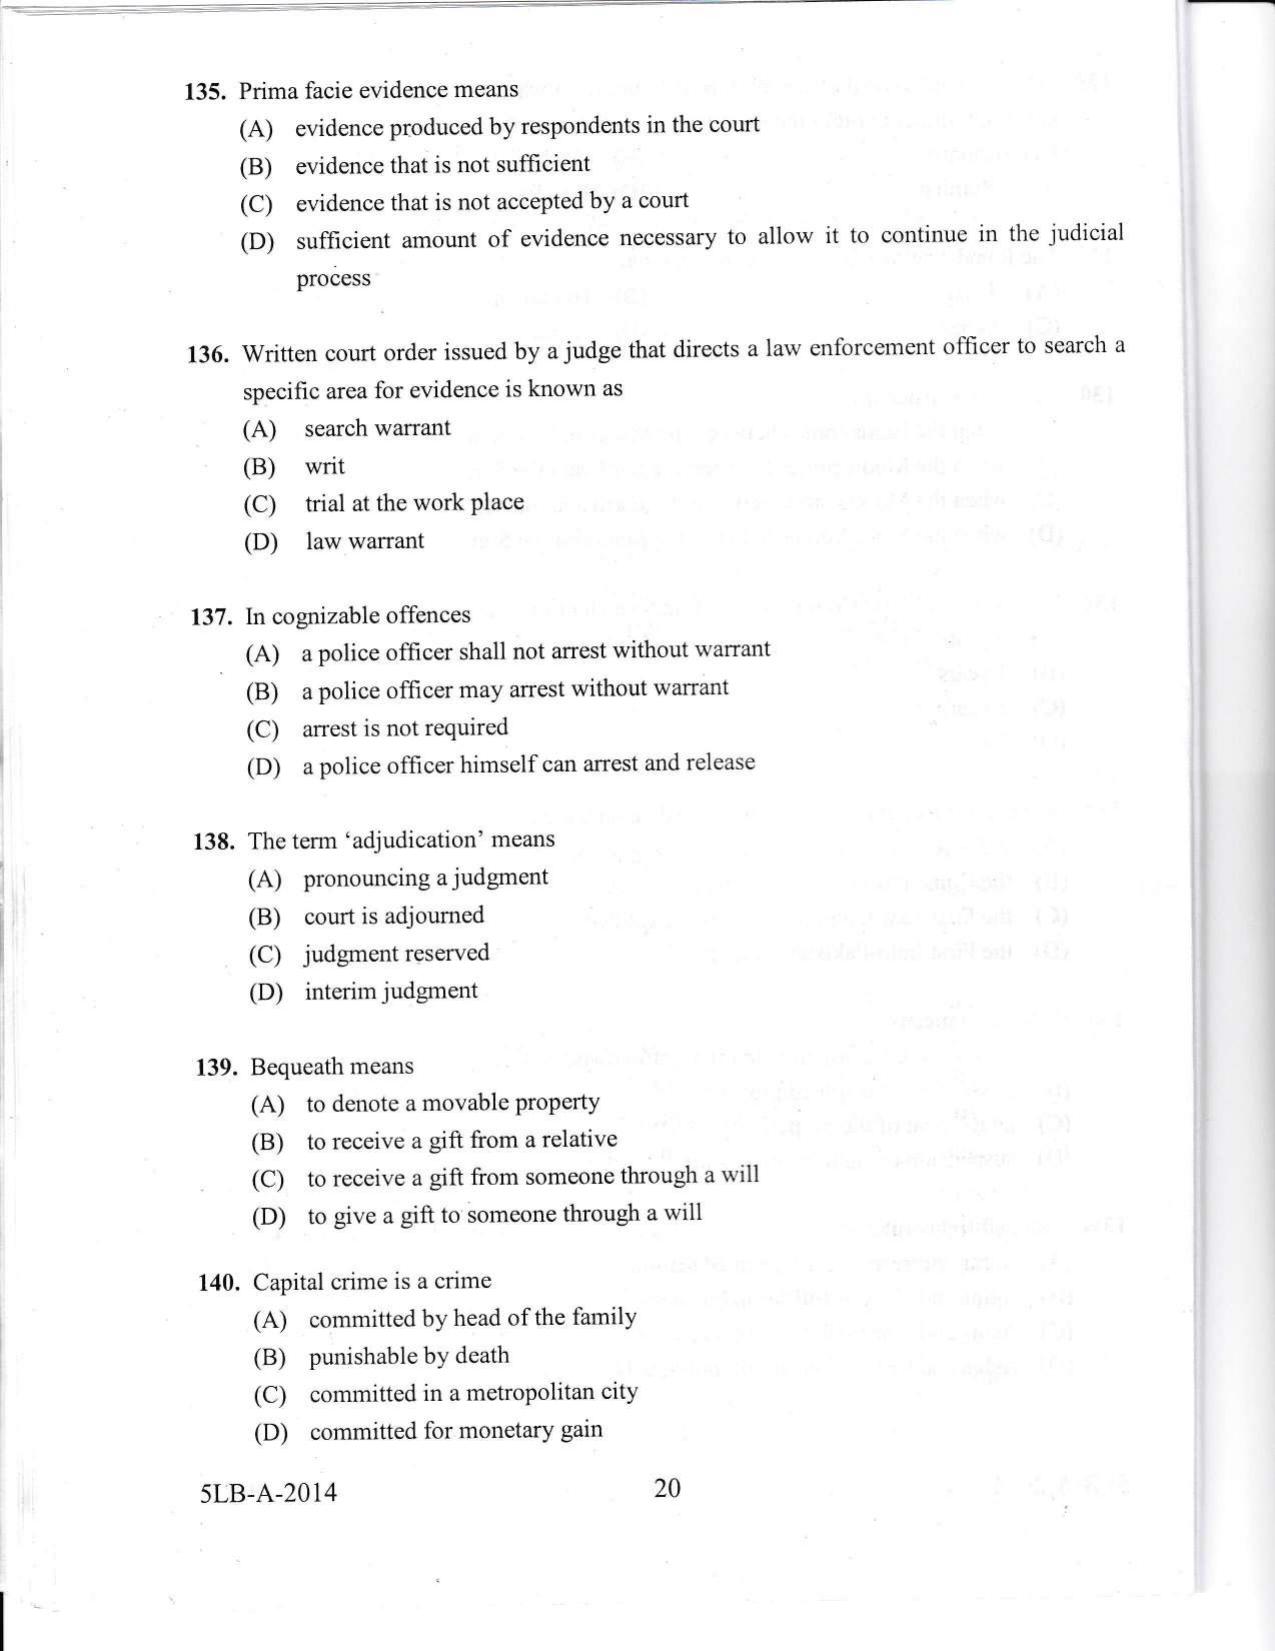 KLEE 5 Year LLB Exam 2014 Question Paper - Page 20